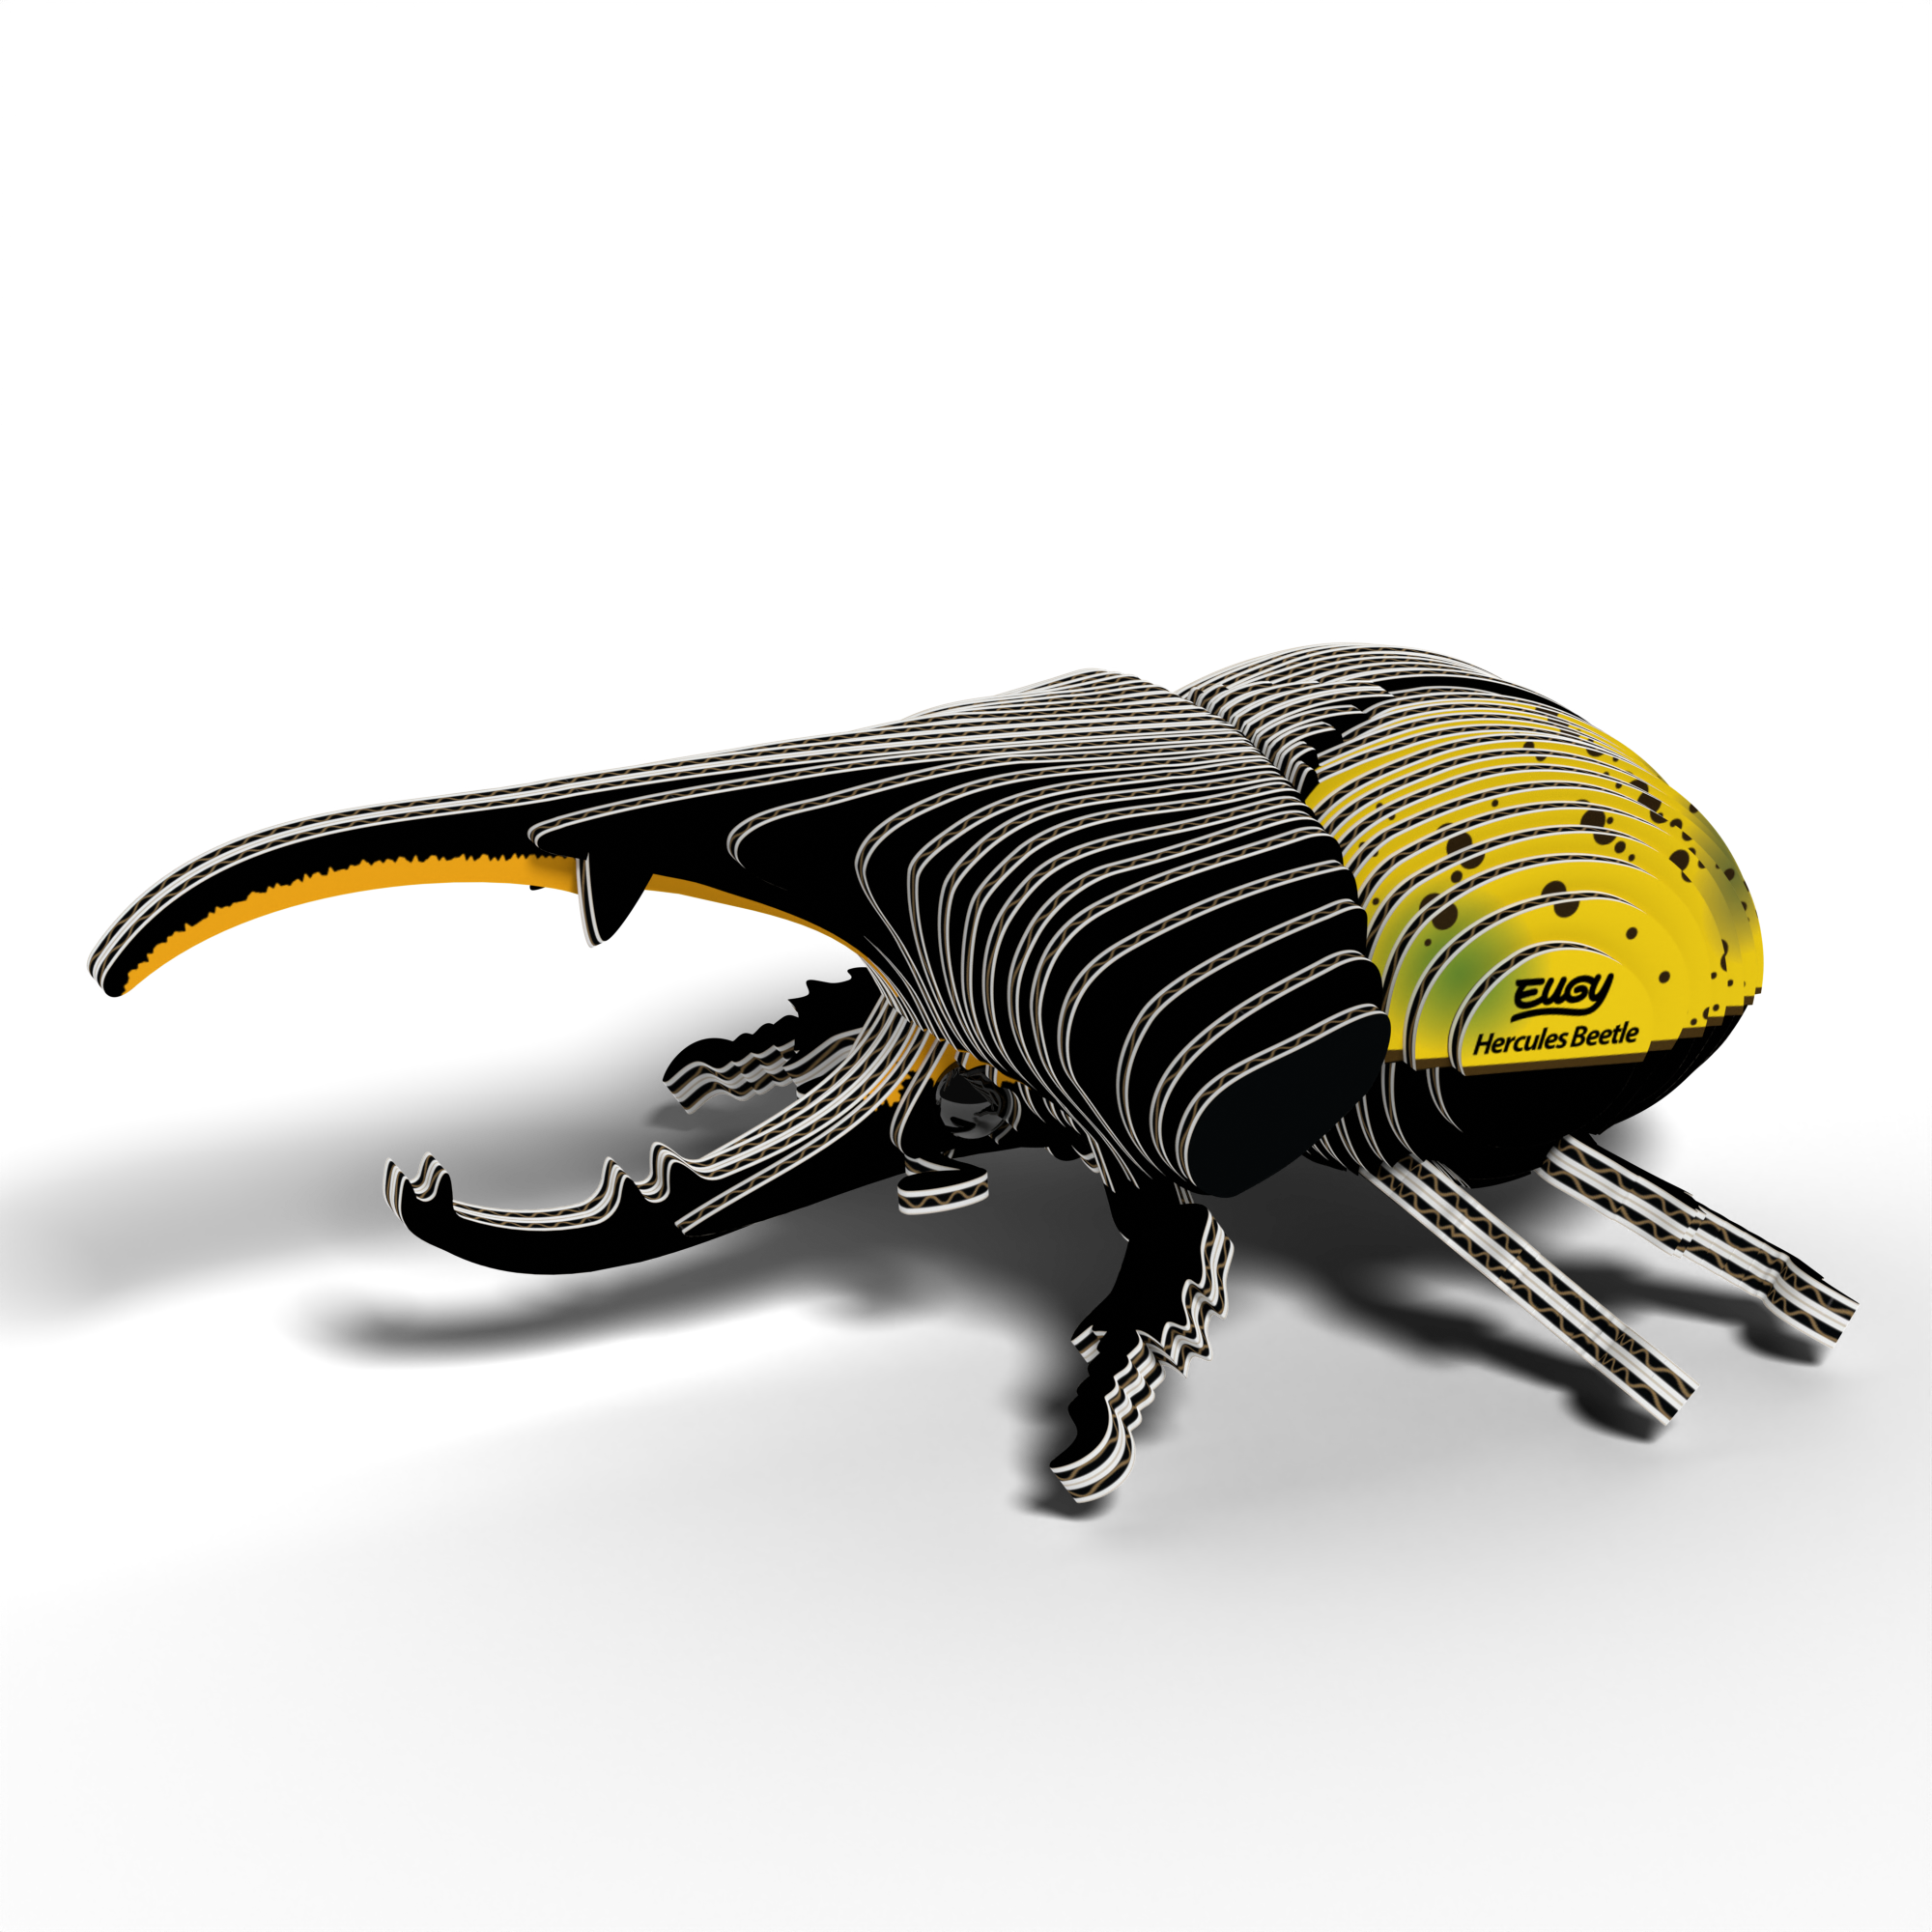 EUGY Hercules Beetle - Any 6 for the price of 5 (Add 6 to Basket) - Loaded Dice